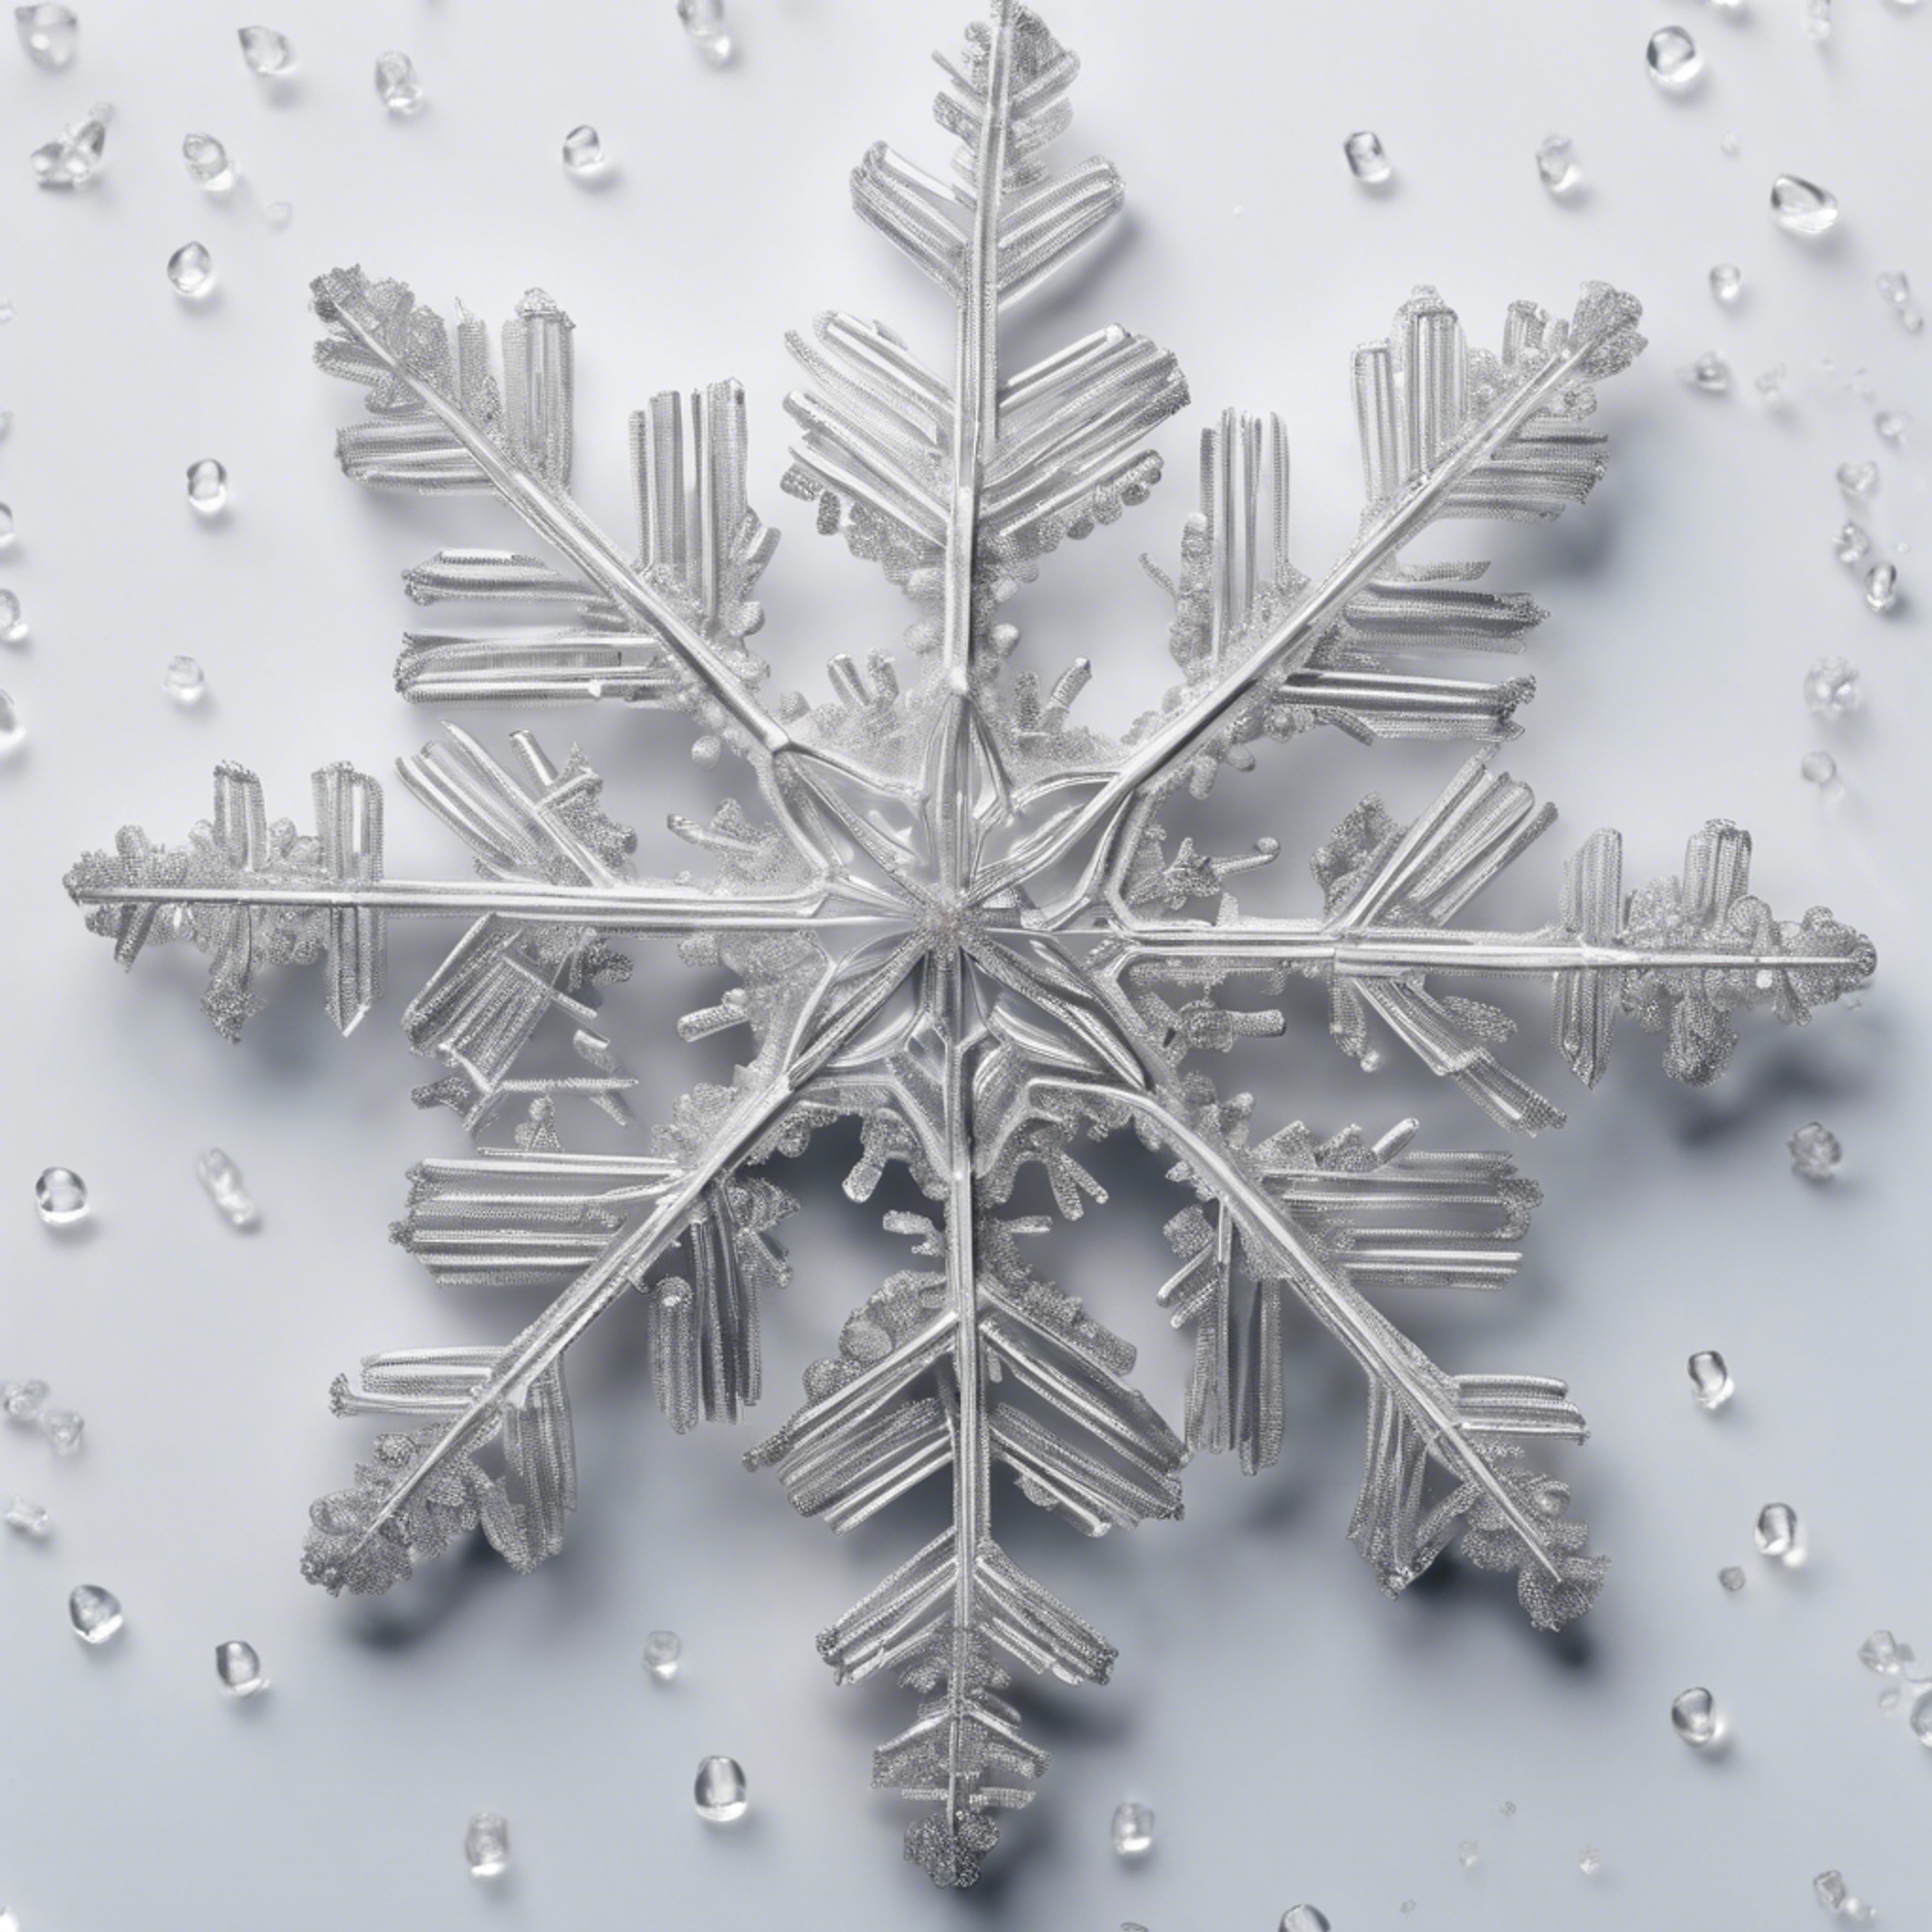 Close-up macro photography of a silver-white snowflake, intricate in detail, against a cool white background. Tapeta[e4635791b5a244959ce4]